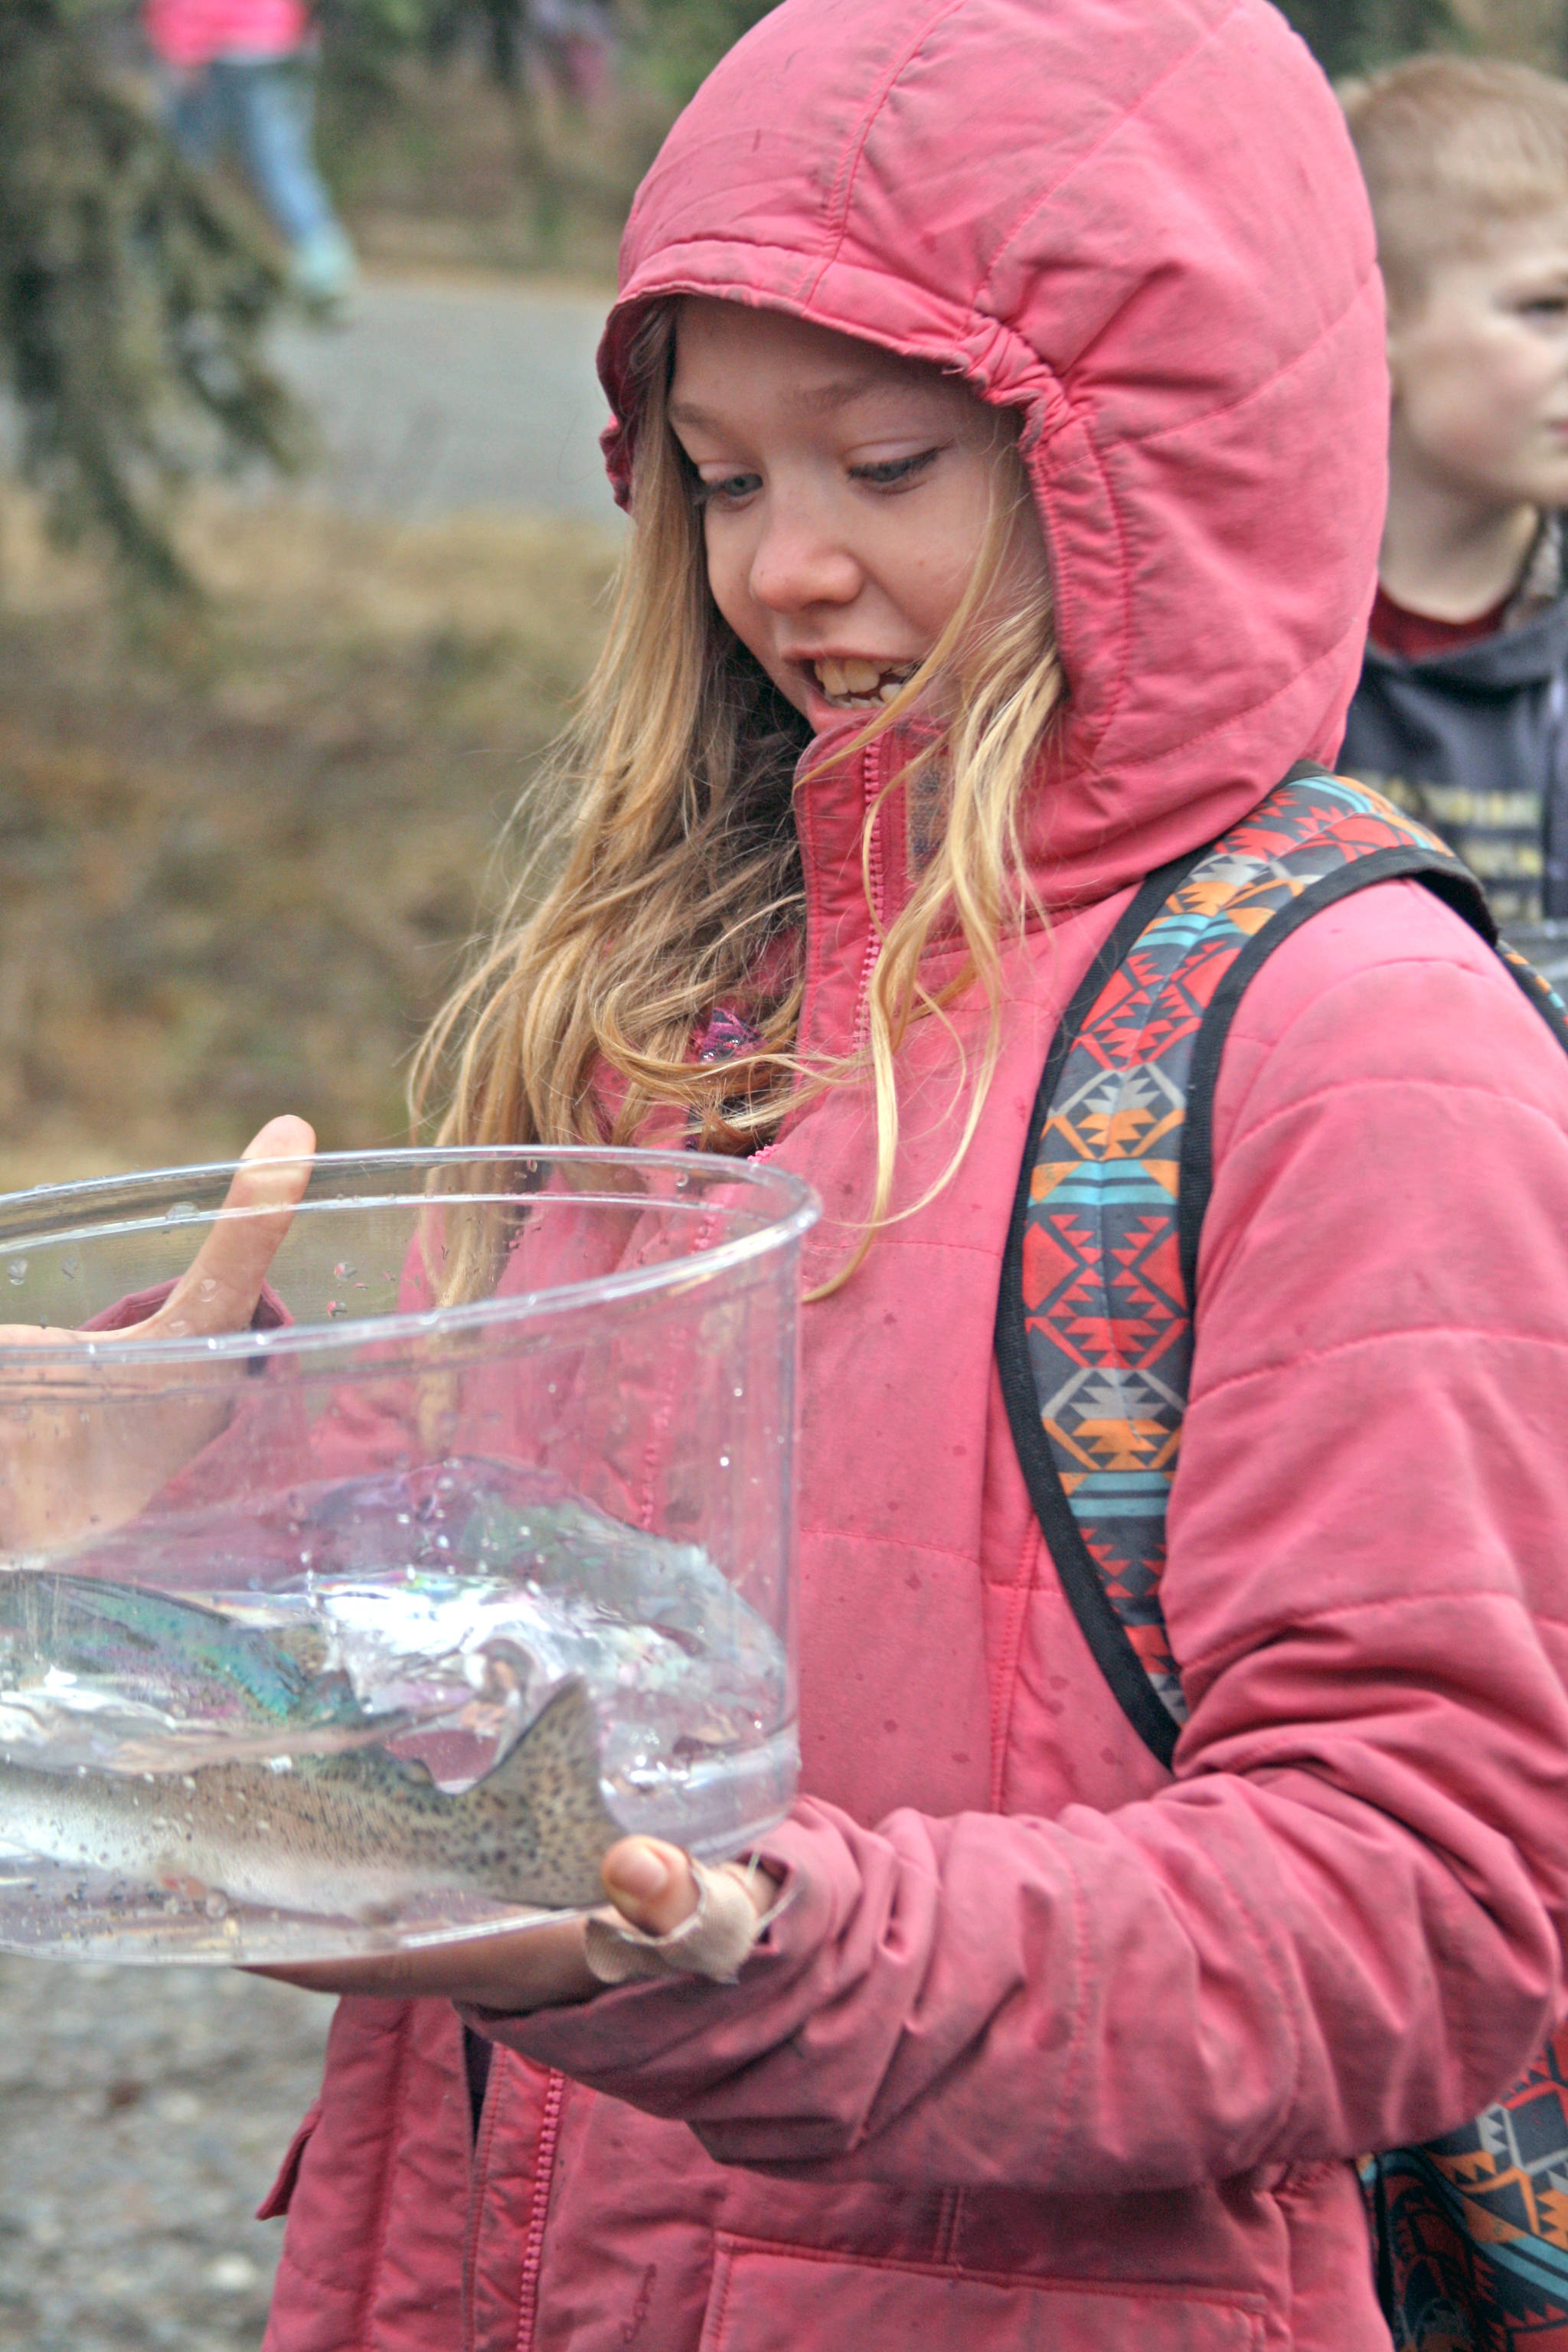 A student ferries a rainbow trout to Johnson Lake during the 18th Annual Kenai Peninsula Salmon Celebration in Kasilof. Approximately 950 borough students released 5,000 fish into the lake as part of an Alaska Department of Fish and Game restocking effort. (Photo by Erin Thompson/Peninsula Clarion)